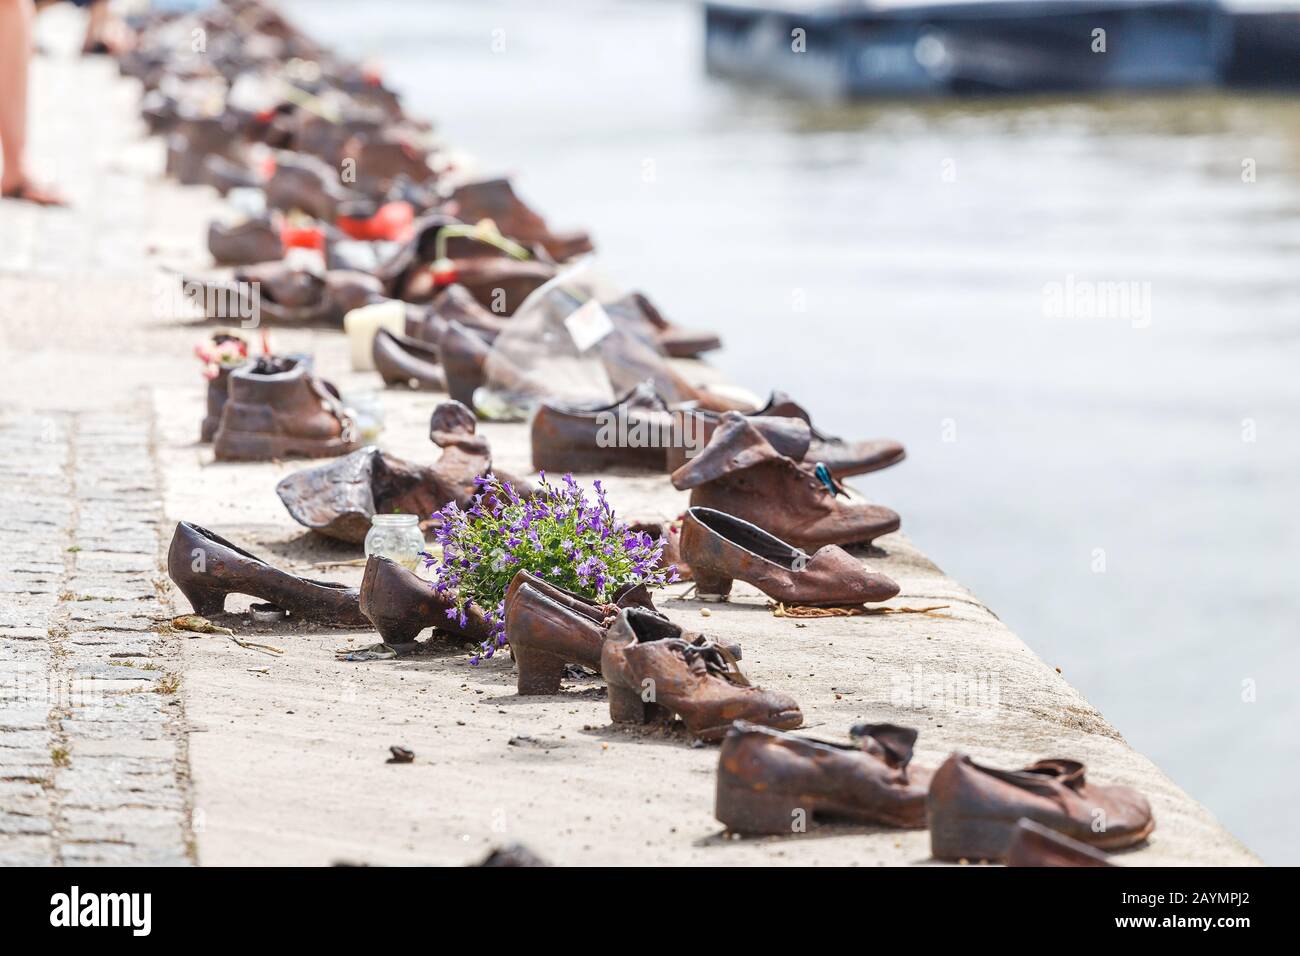 14 MAY 2018, BUDAPEST, HUNGARY: Iron shoes memorial to Jewish people executed while Holocaust in Budapest Hungary at Danube river bank Stock Photo